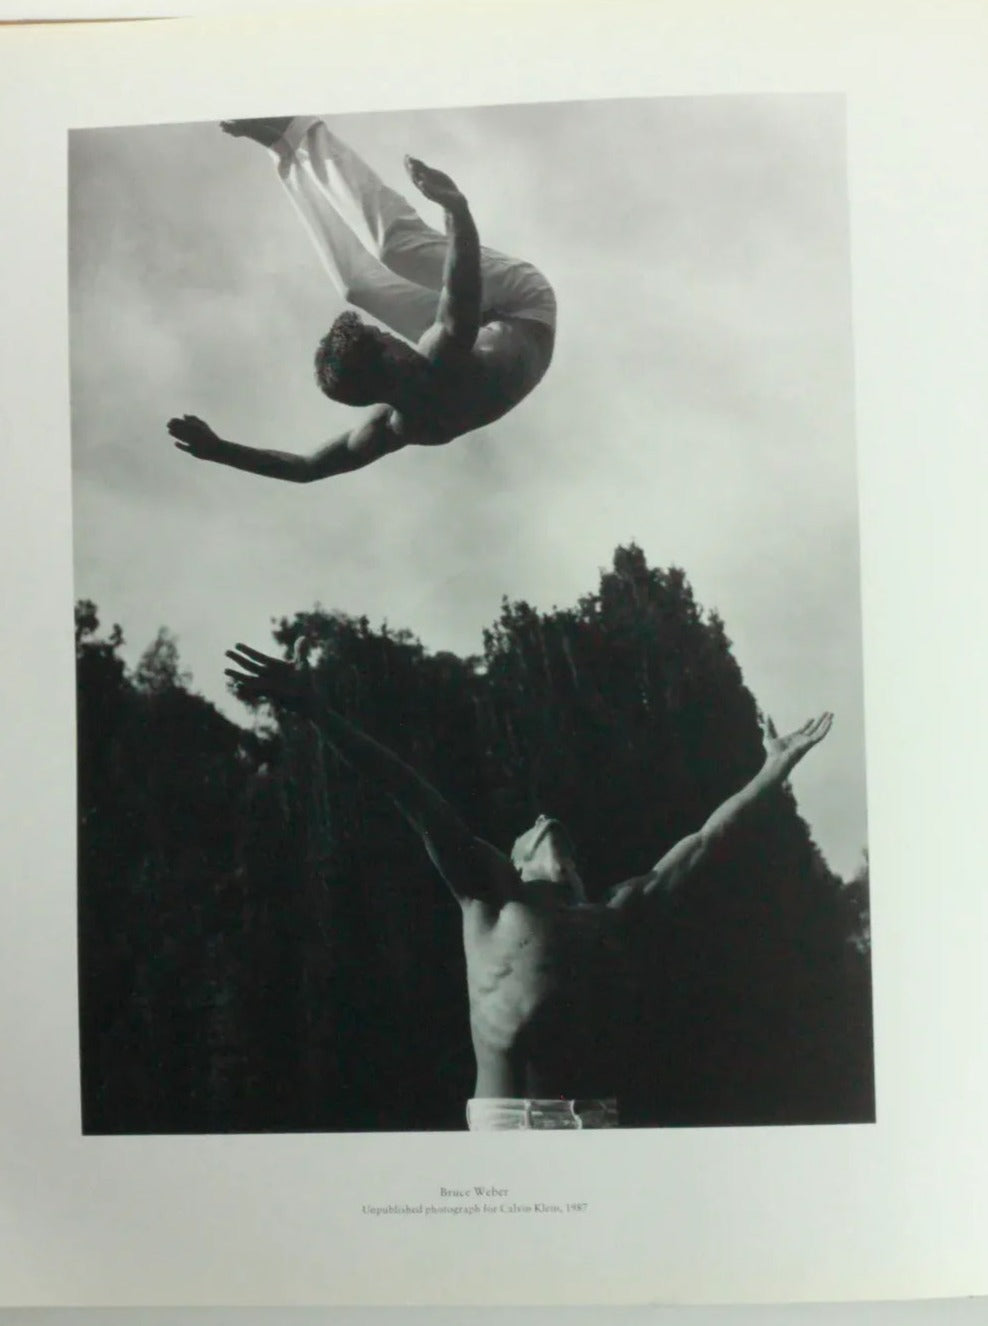 A black and white photograph, part of the exposición en el museo Victoria & Albert Museum, captures a person mid-air during a backflip above another who stands with arms outstretched, ready to catch them. Tall trees frame the background, creating a dynamic and intense scene.